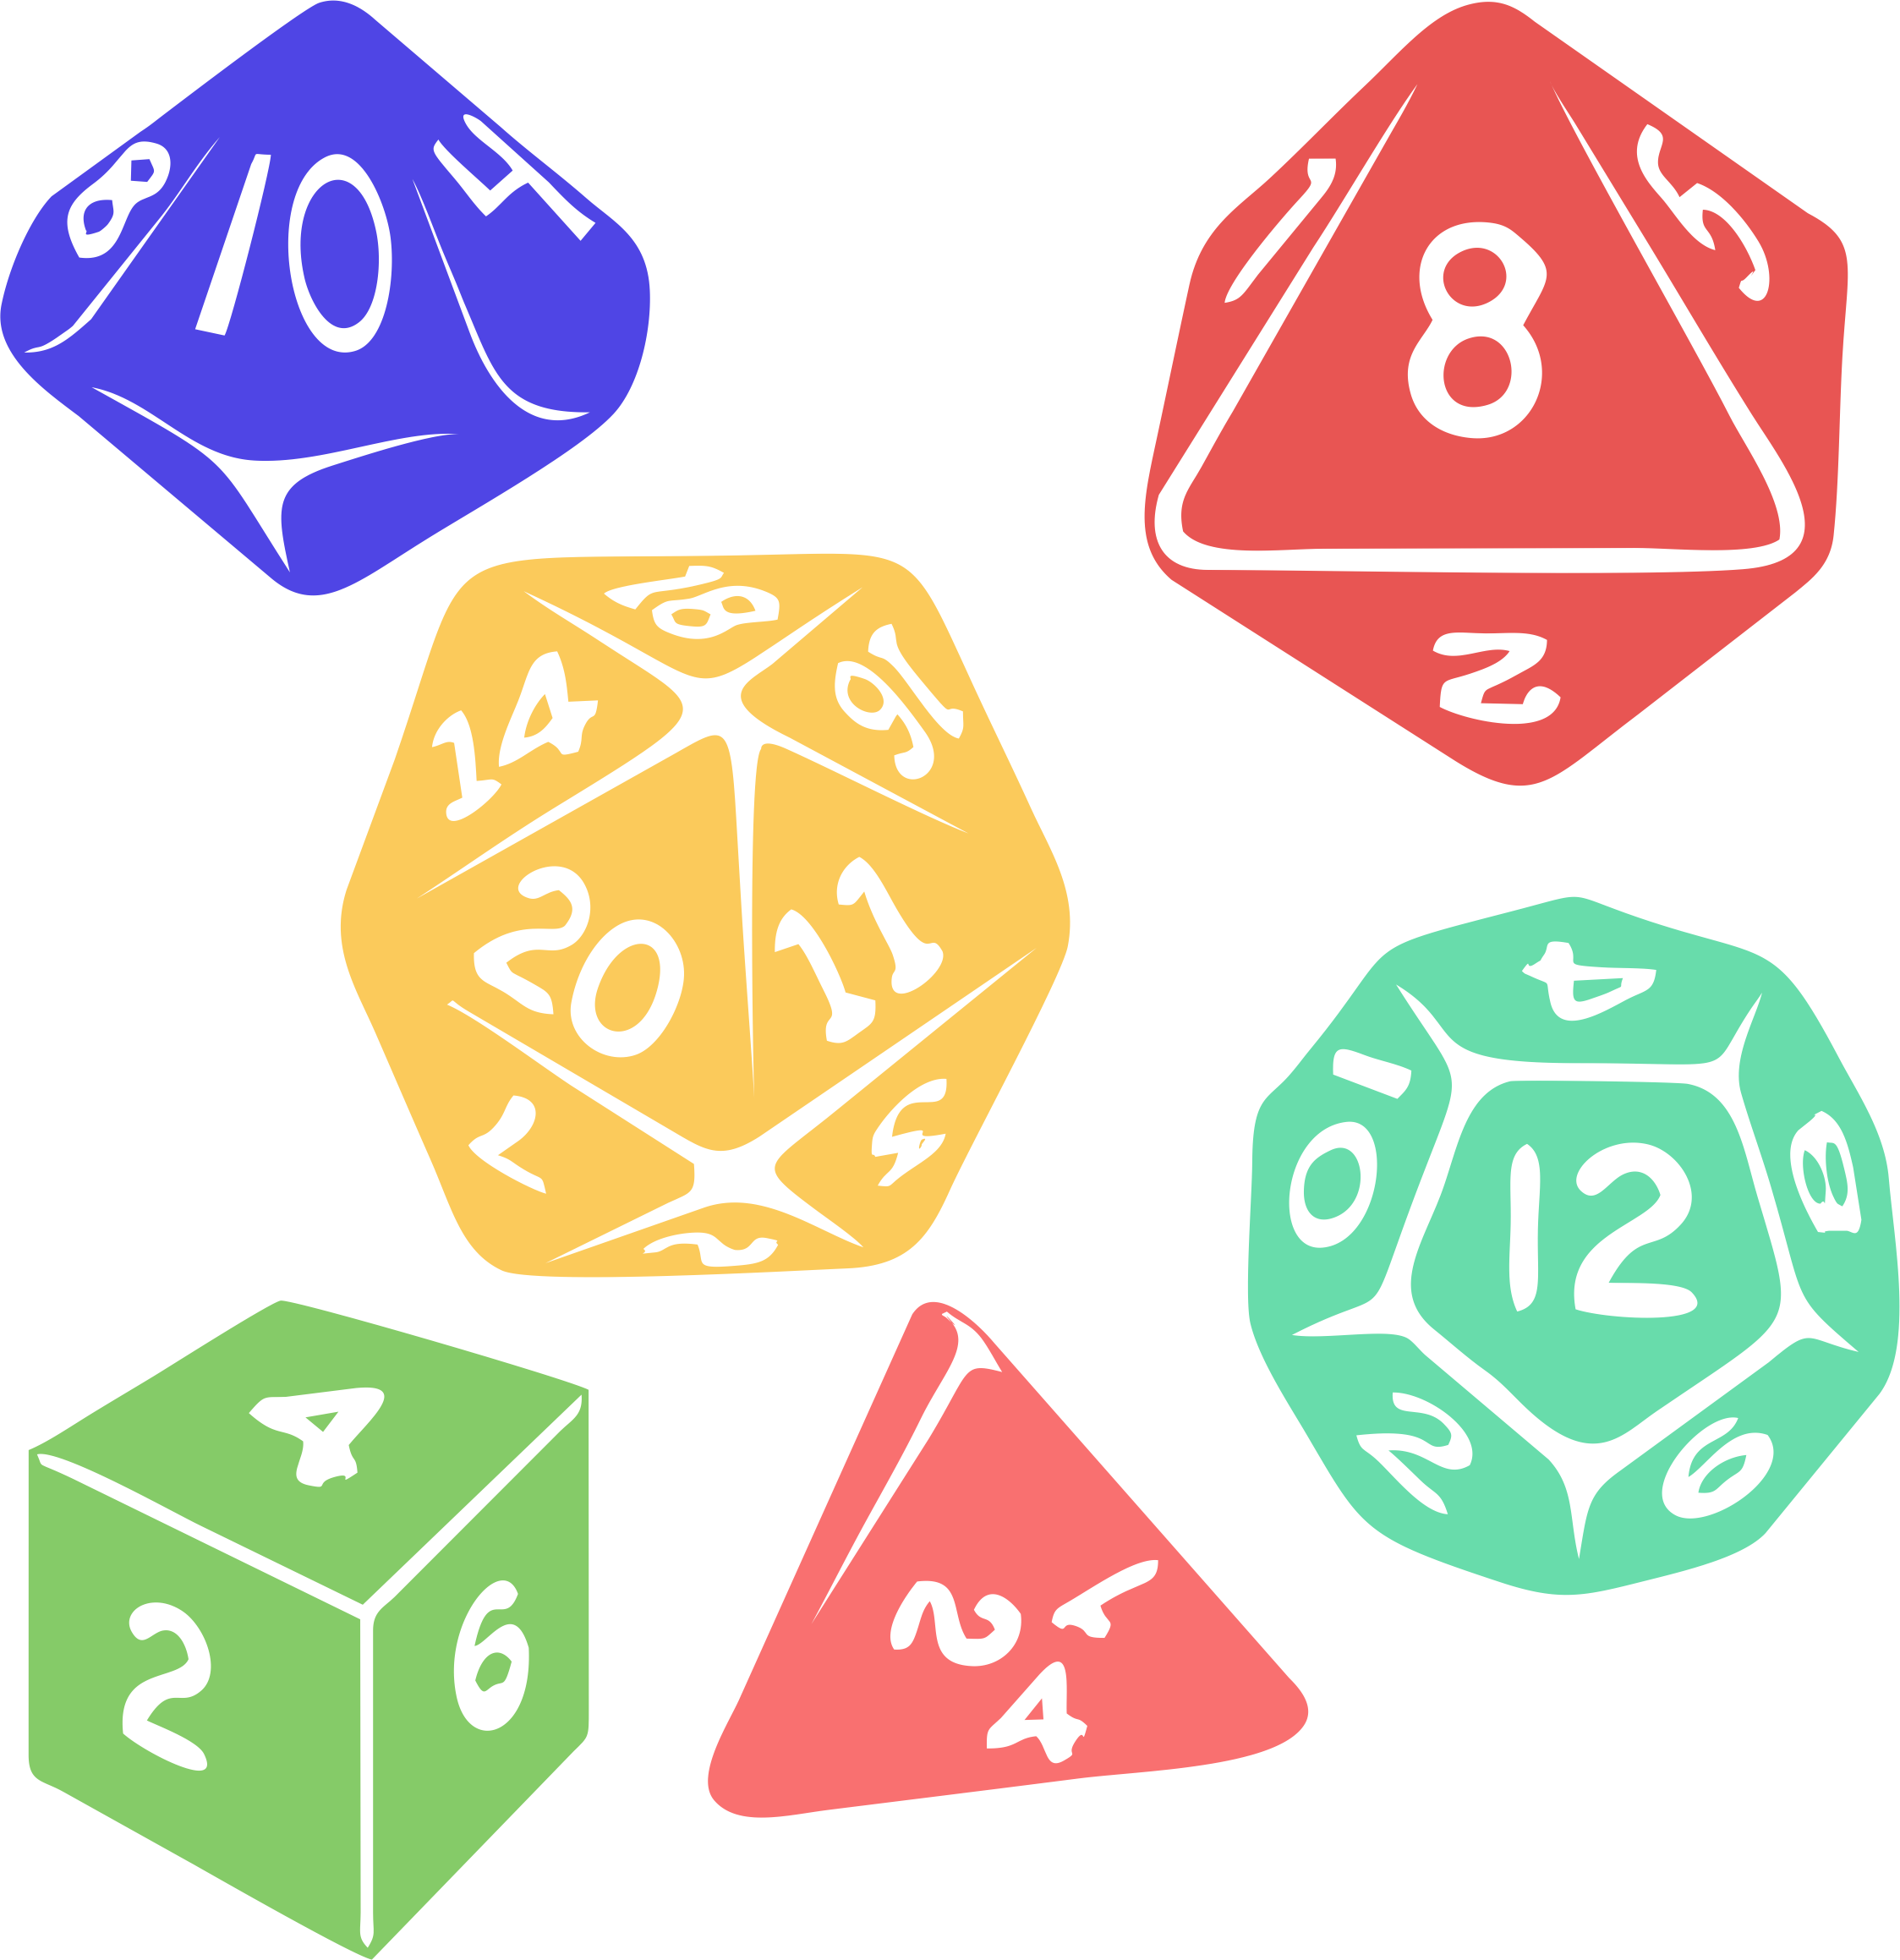 Free Vectors dice roll (2), two dice roll 